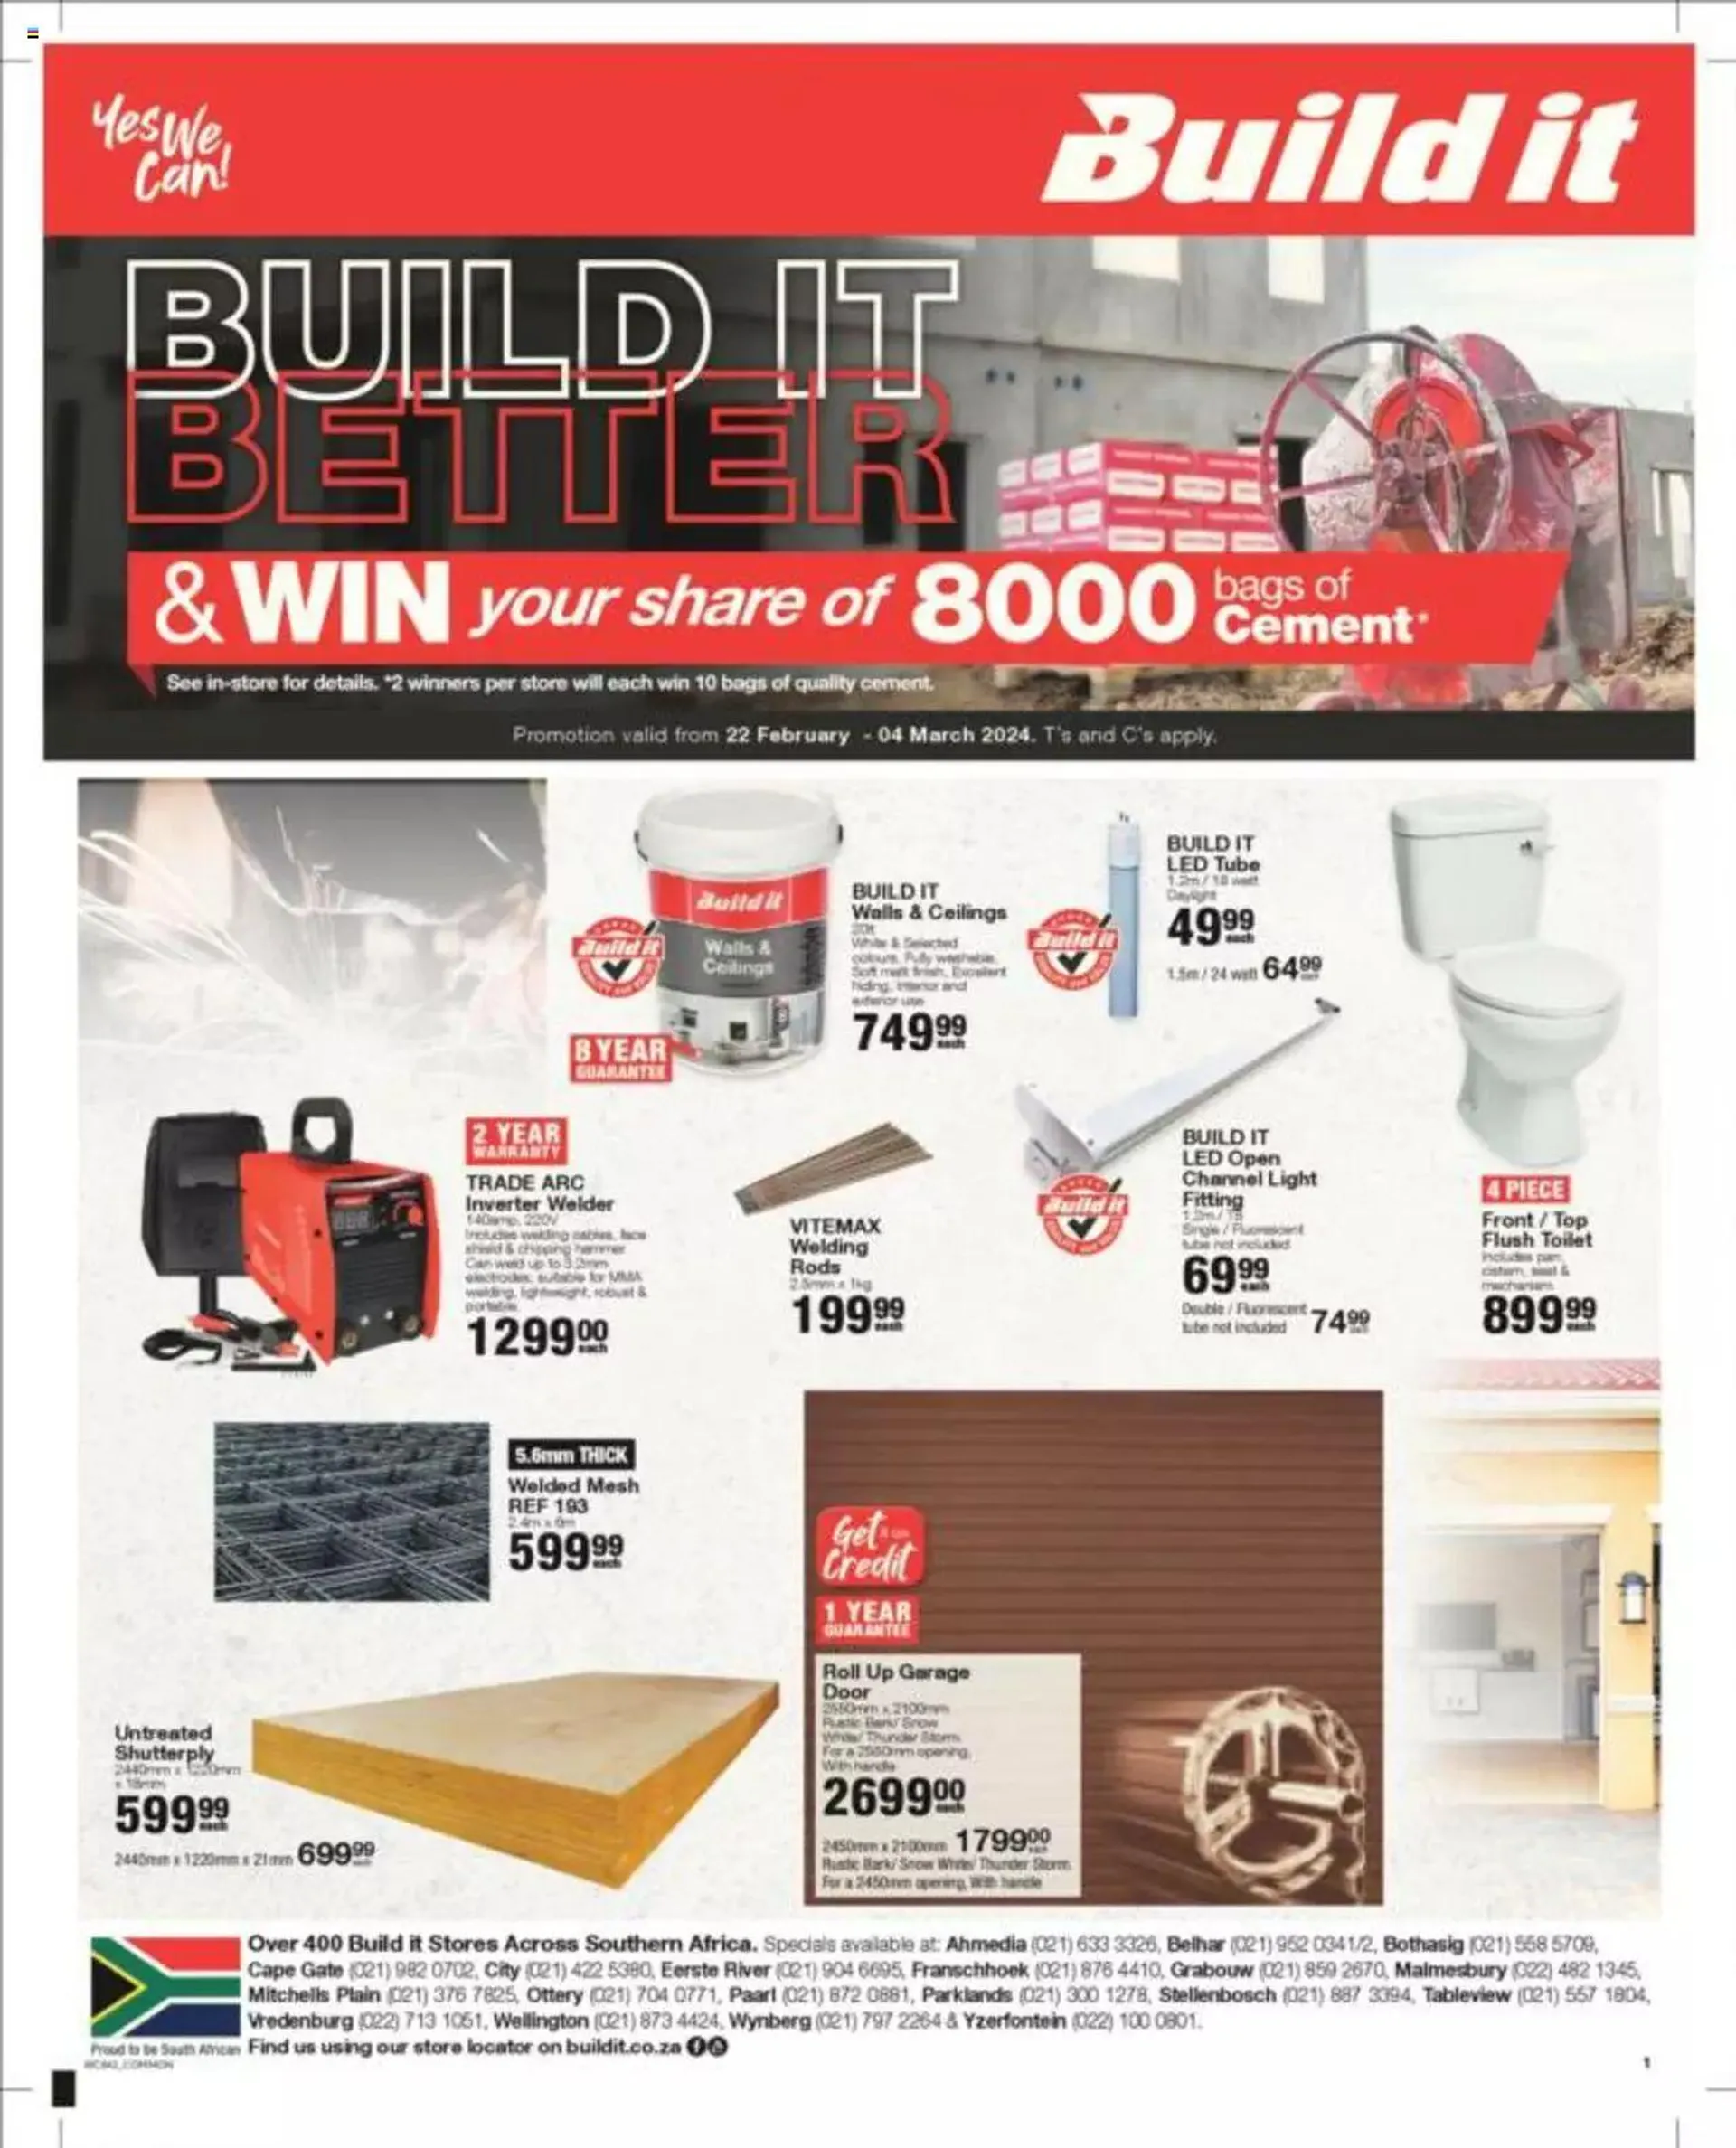 Build It Western Cape - Specials - 22 February 4 March 2024 - Page 1